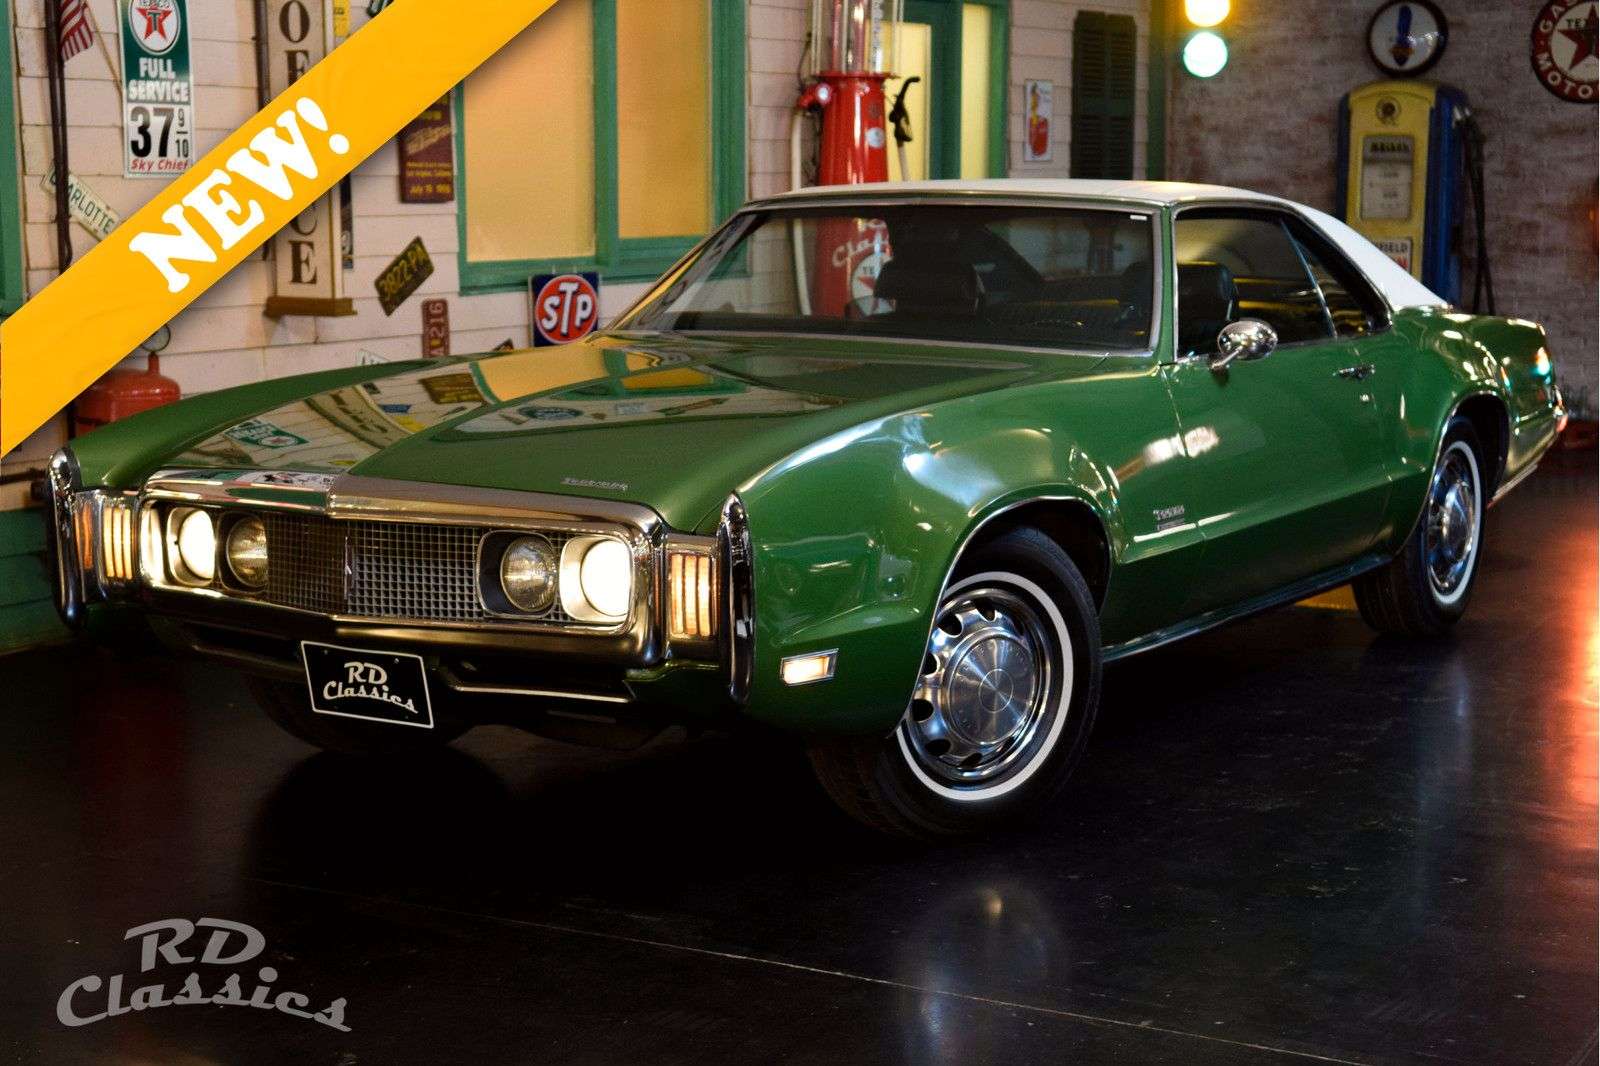 Oldsmobile Toronado Coupe in Green antique / classic in Emmerich for € 29,950.-